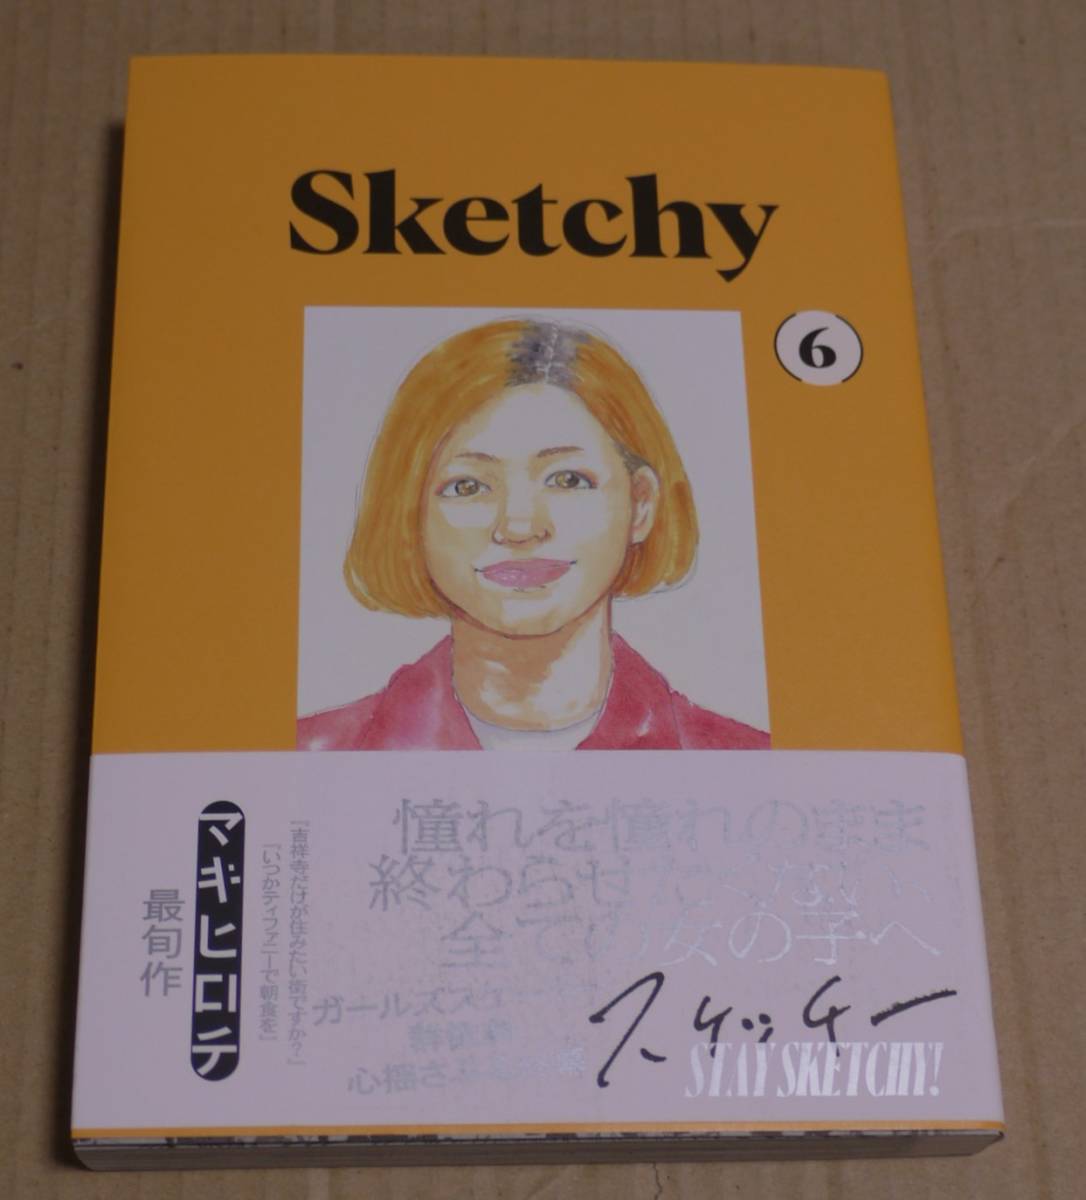  autograph illustration . autographed [Sketchy sketch -6 volume ](makihirochi)& book cover click post. postage included last volume 